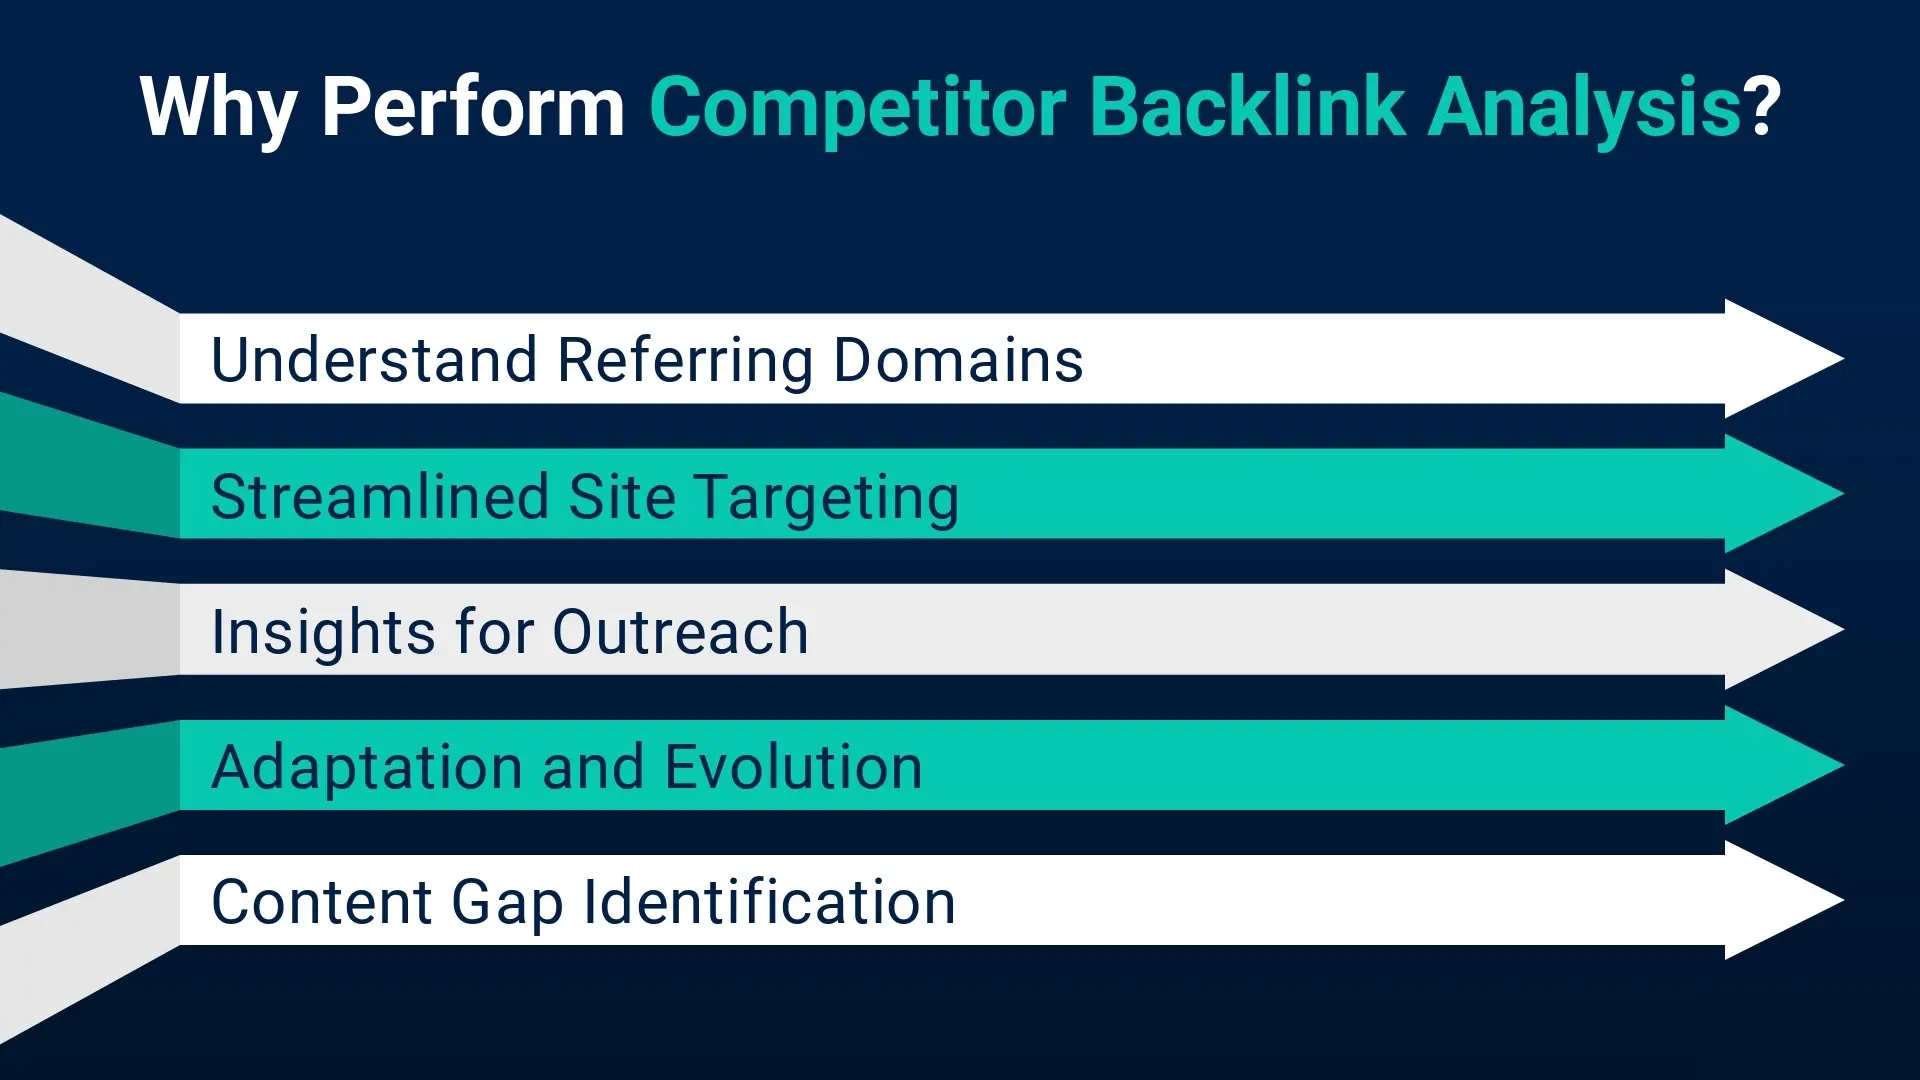 5 benefits listed of performing competitor backlink analysis